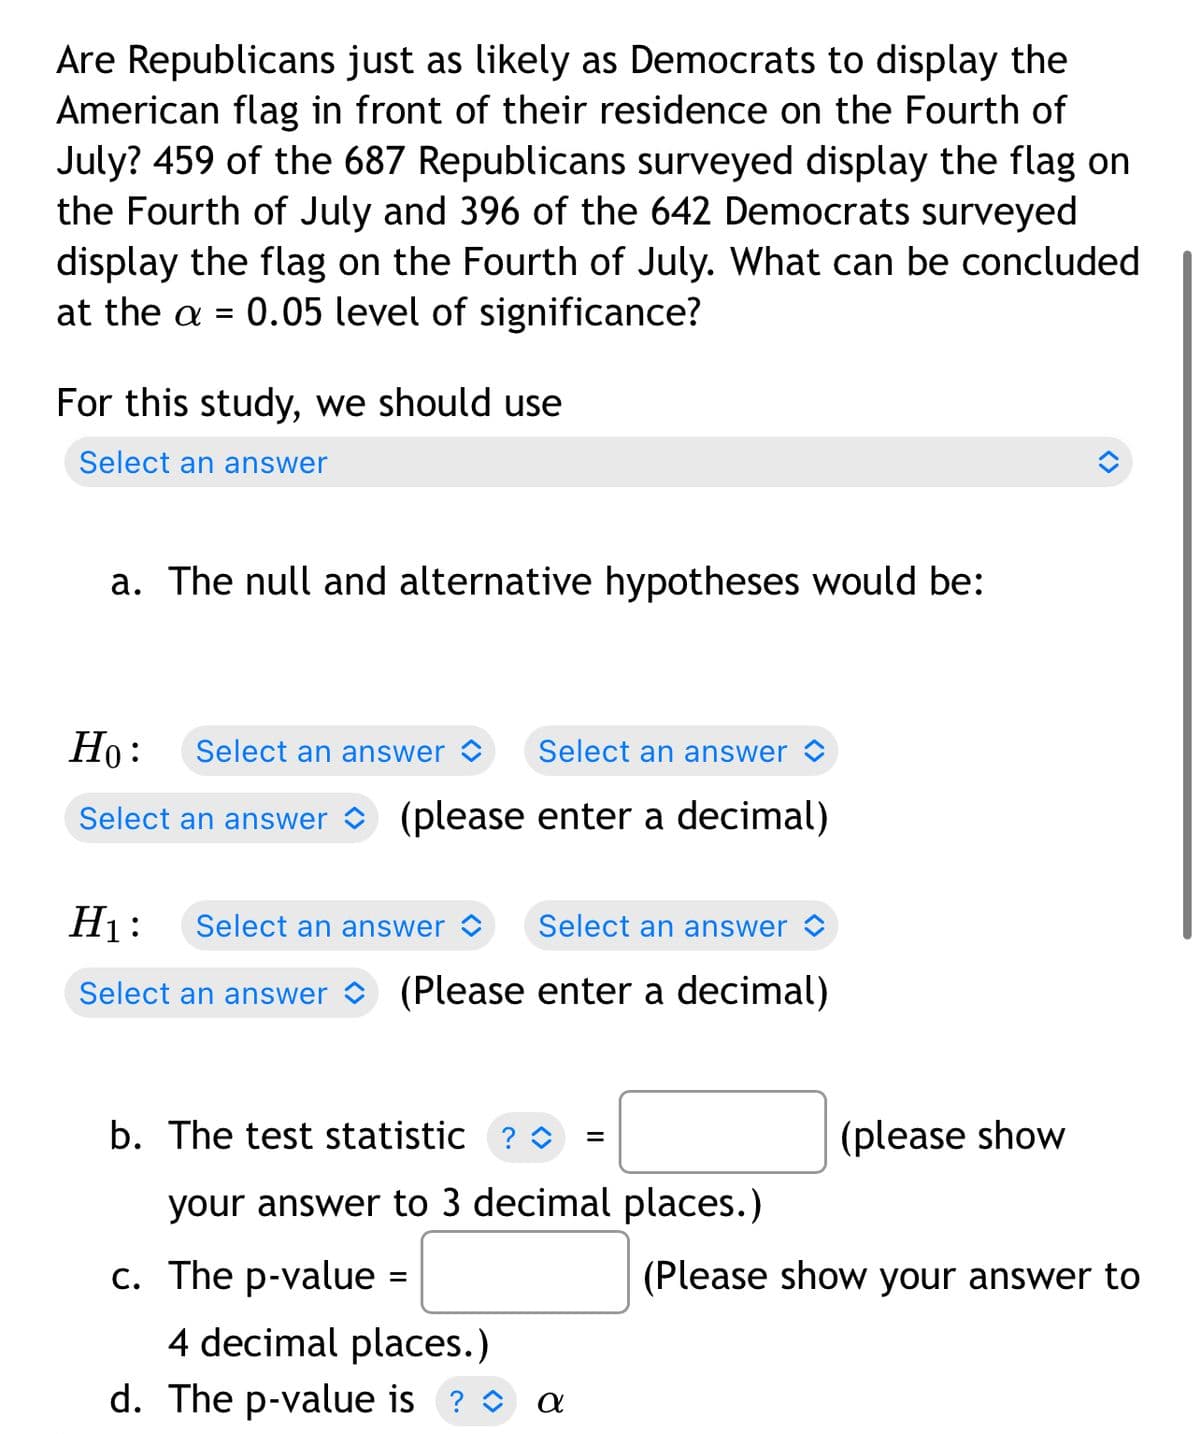 Are Republicans just as likely as Democrats to display the
American flag in front of their residence on the Fourth of
July? 459 of the 687 Republicans surveyed display the flag on
the Fourth of July and 396 of the 642 Democrats surveyed
display the flag on the Fourth of July. What can be concluded
at the a = 0.05 level of significance?
For this study, we should use
Select an answer
a. The null and alternative hypotheses would be:
Но:
Select an answer >
Select an answer <
Select an answer
(please enter a decimal)
H1:
Select an answer >
Select an answer <
Select an answer
(Please enter a decimal)
b. The test statistic ? O
(please show
your answer to 3 decimal places.)
c. The p-value =
(Please show your answer to
4 decimal places.)
d. The p-value is ? O a
